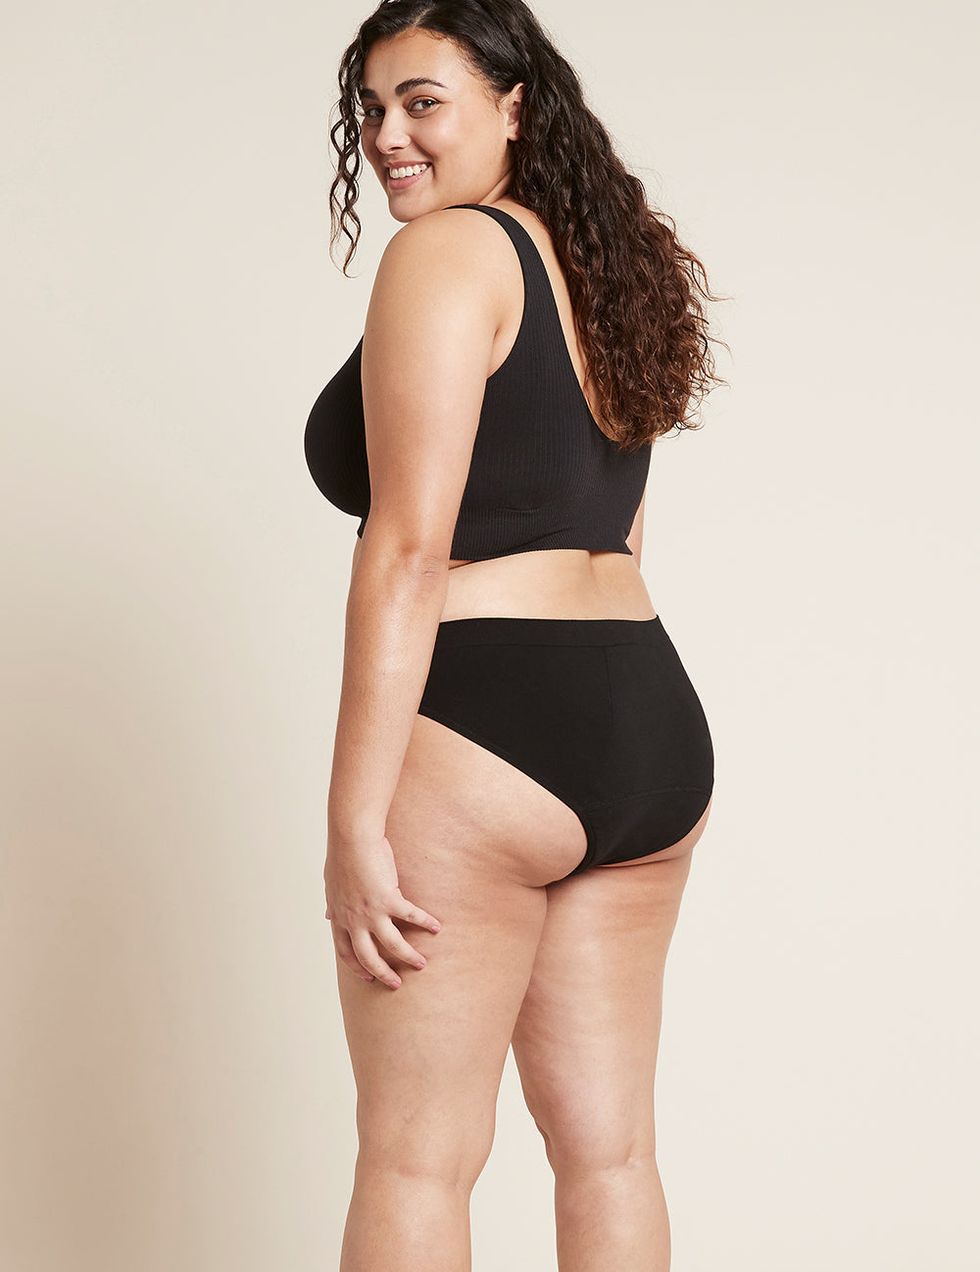 Thinx For All Women's Plus Size Moderate Absorbency High-waist